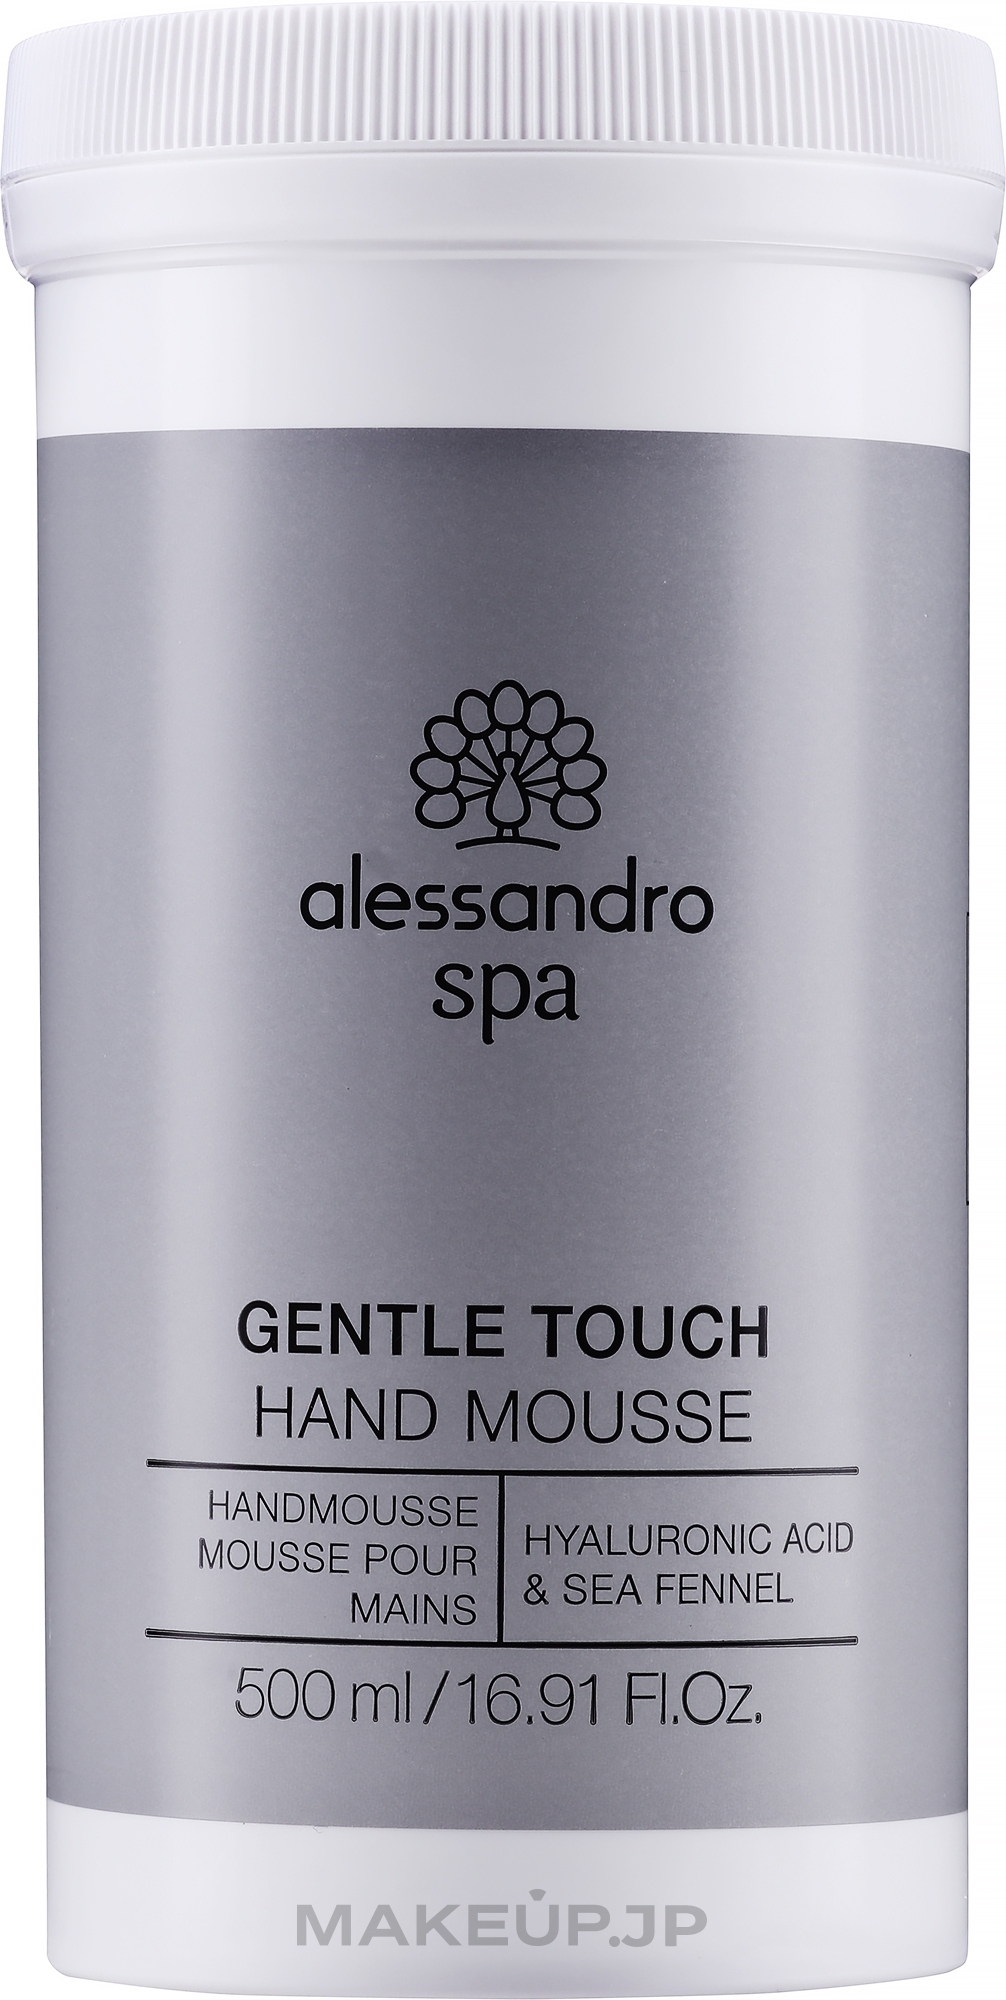 Hand Mousse - Alessandro International Spa Gentle Touch Hand Mousse Salon Size — photo 500 ml